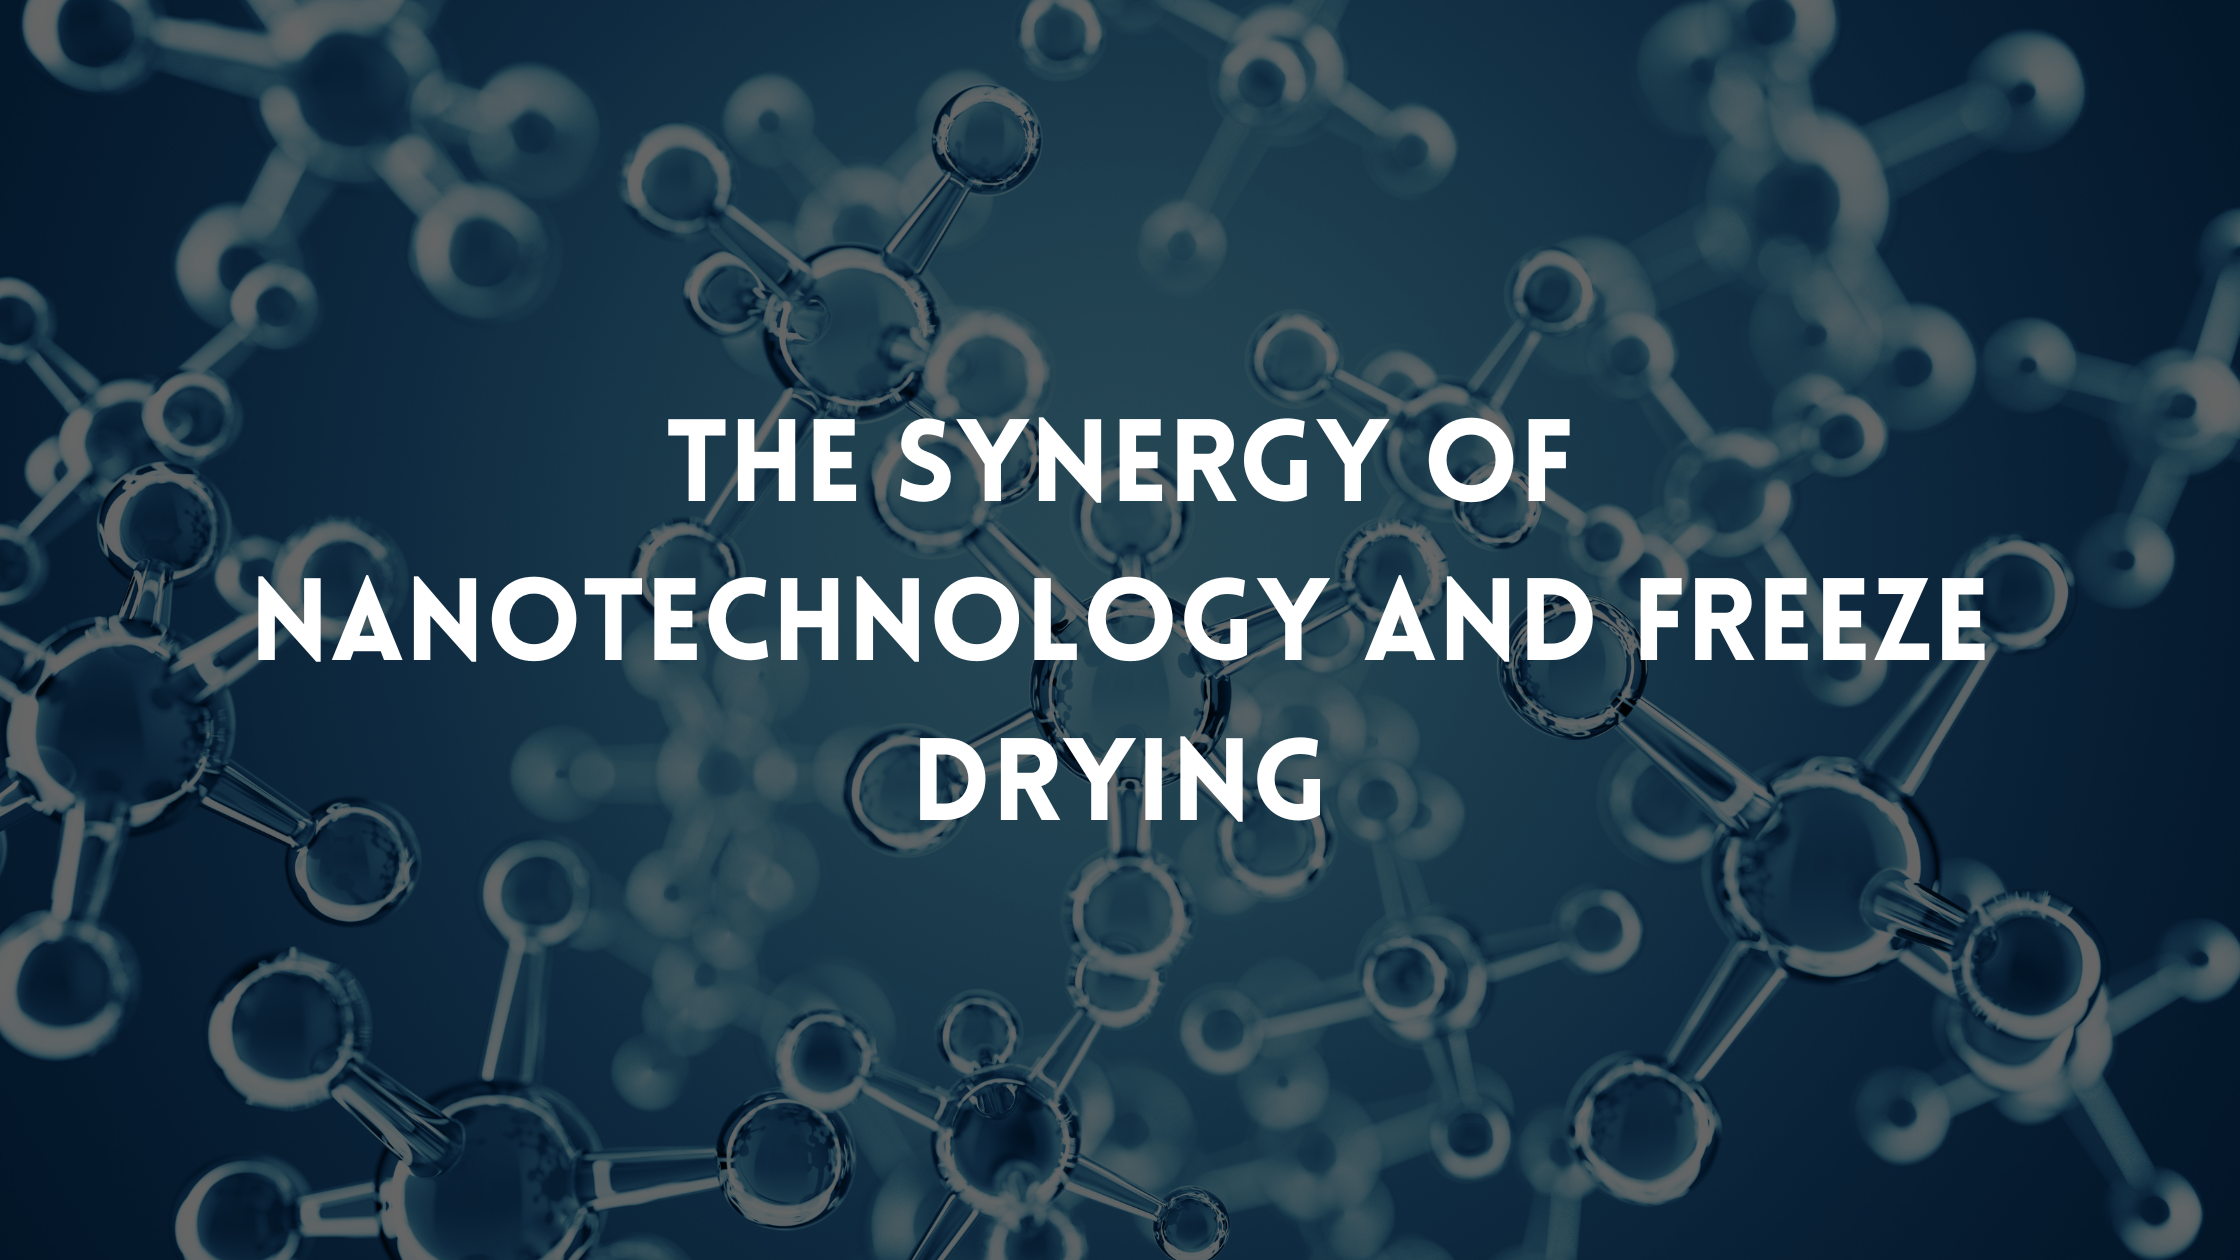 The Synergy of Nanotechnology and Freeze Drying